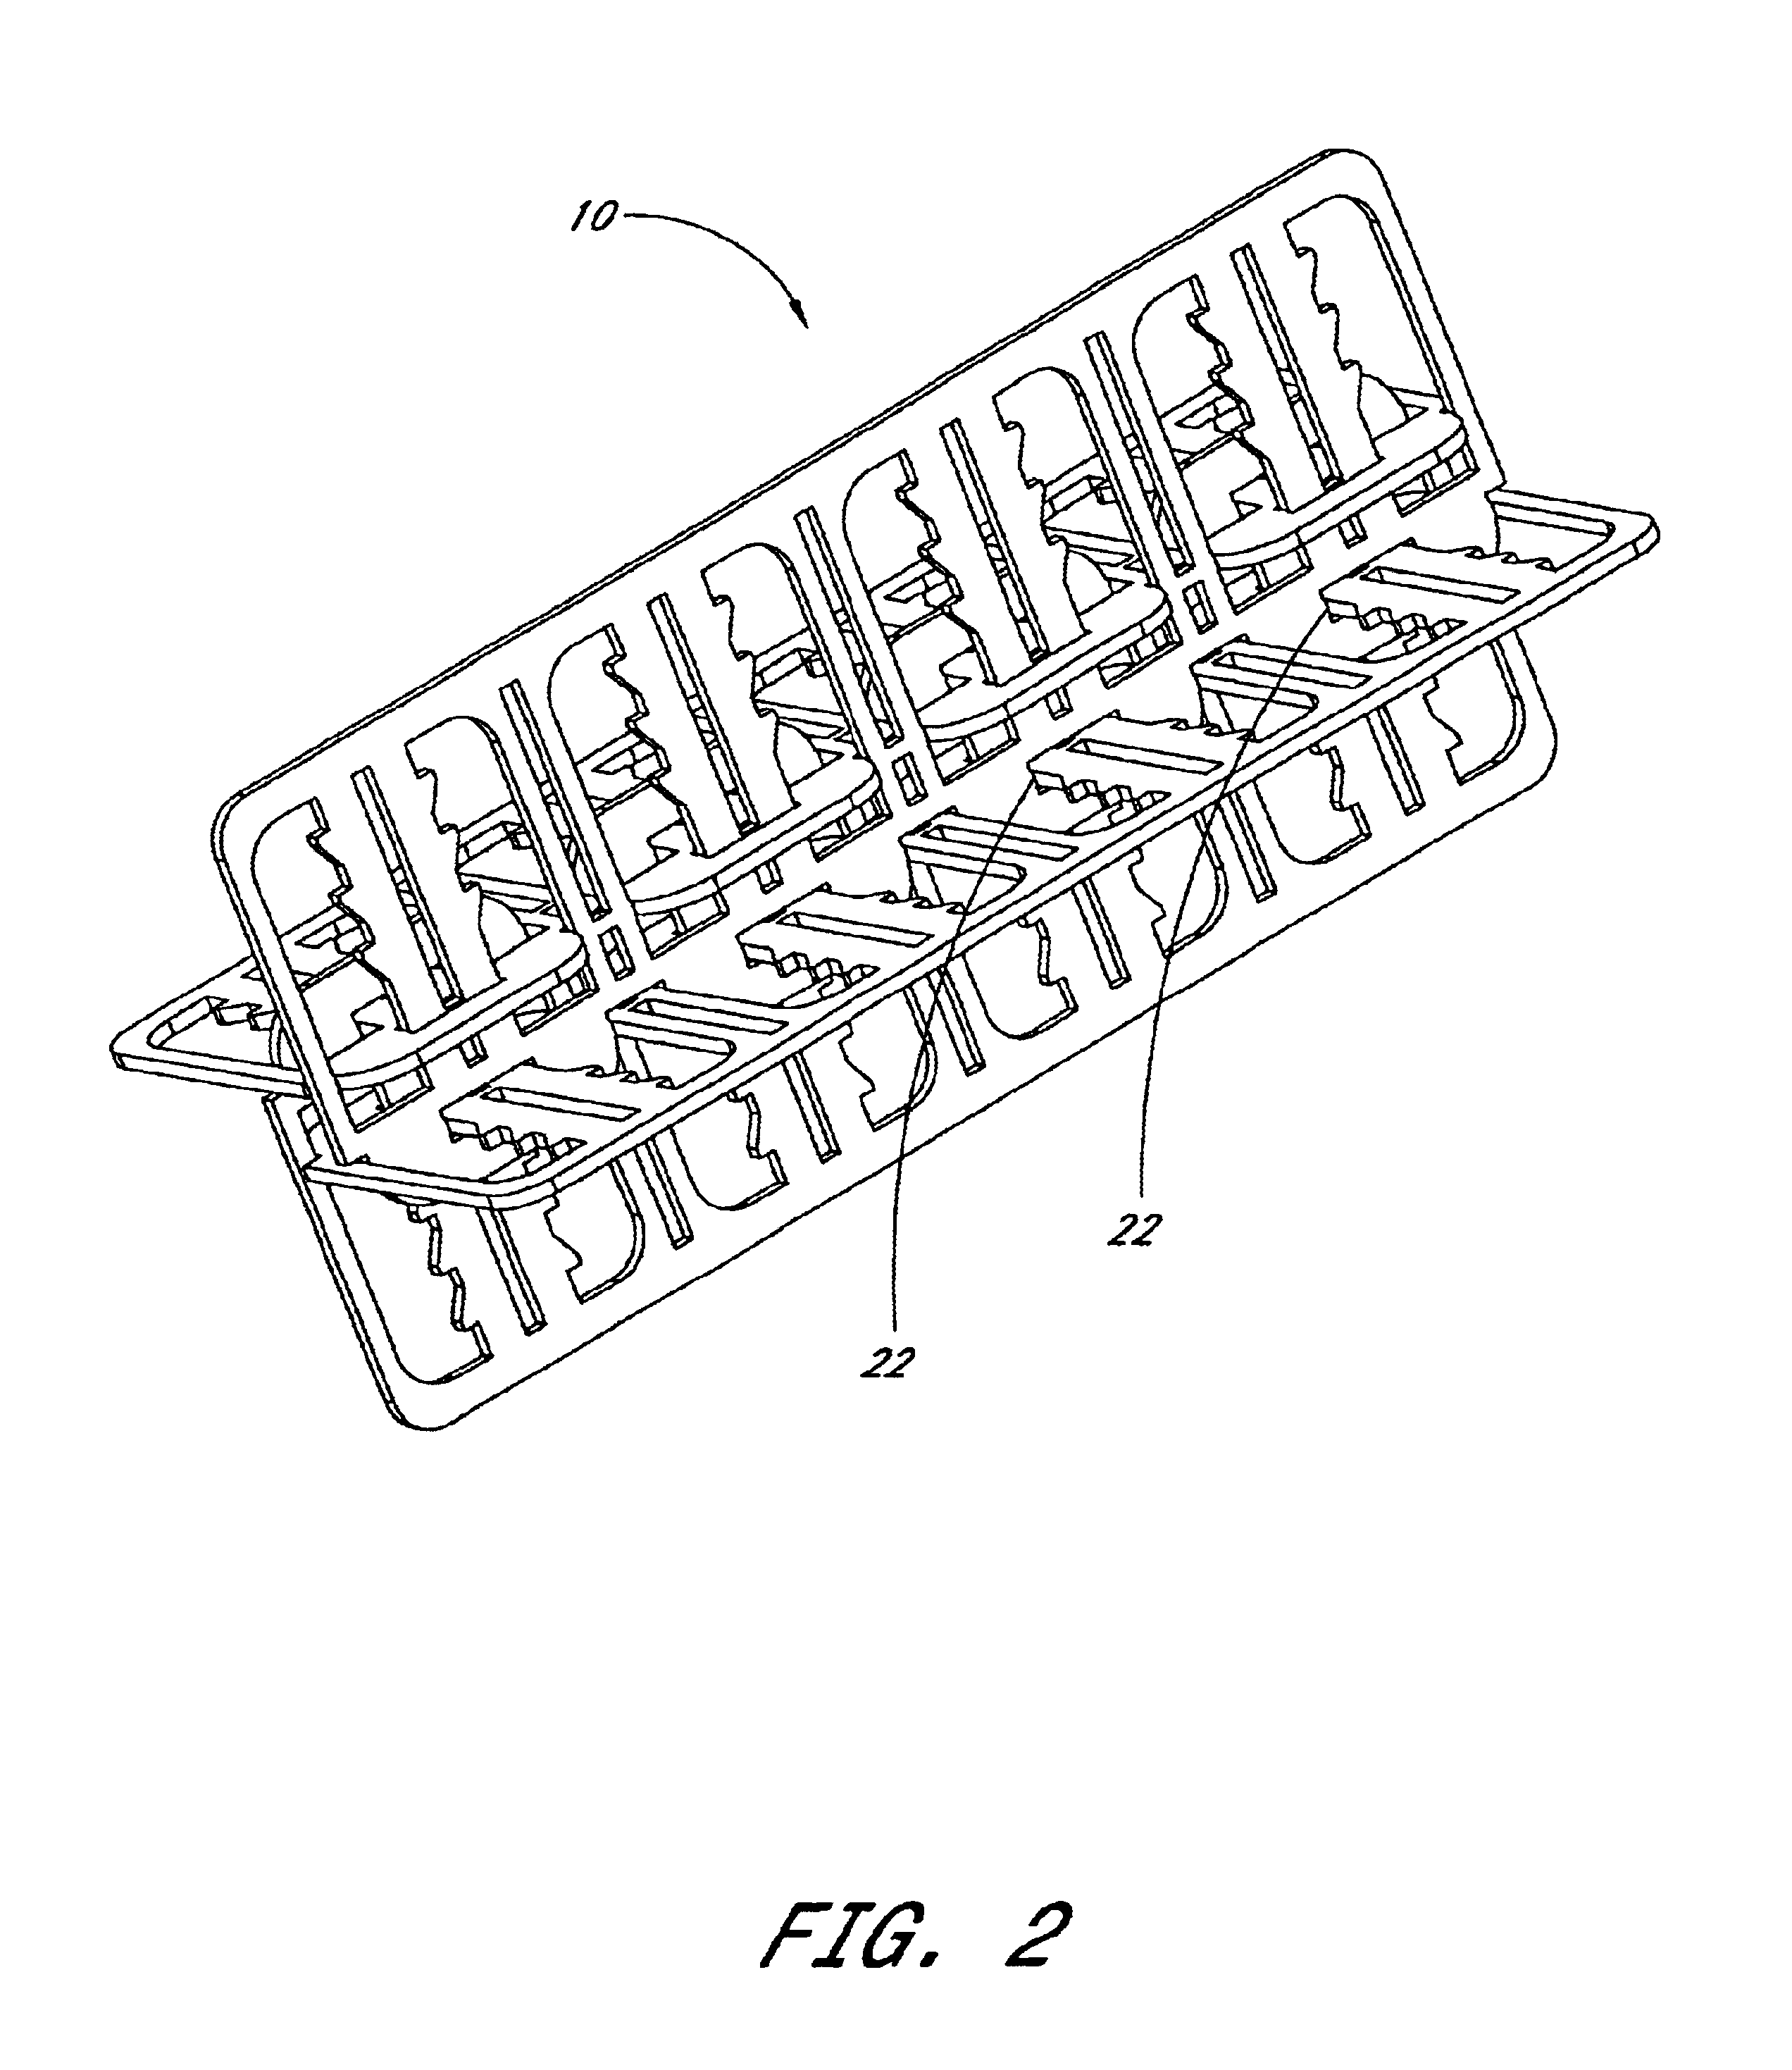 Method of manufacturing a prosthesis